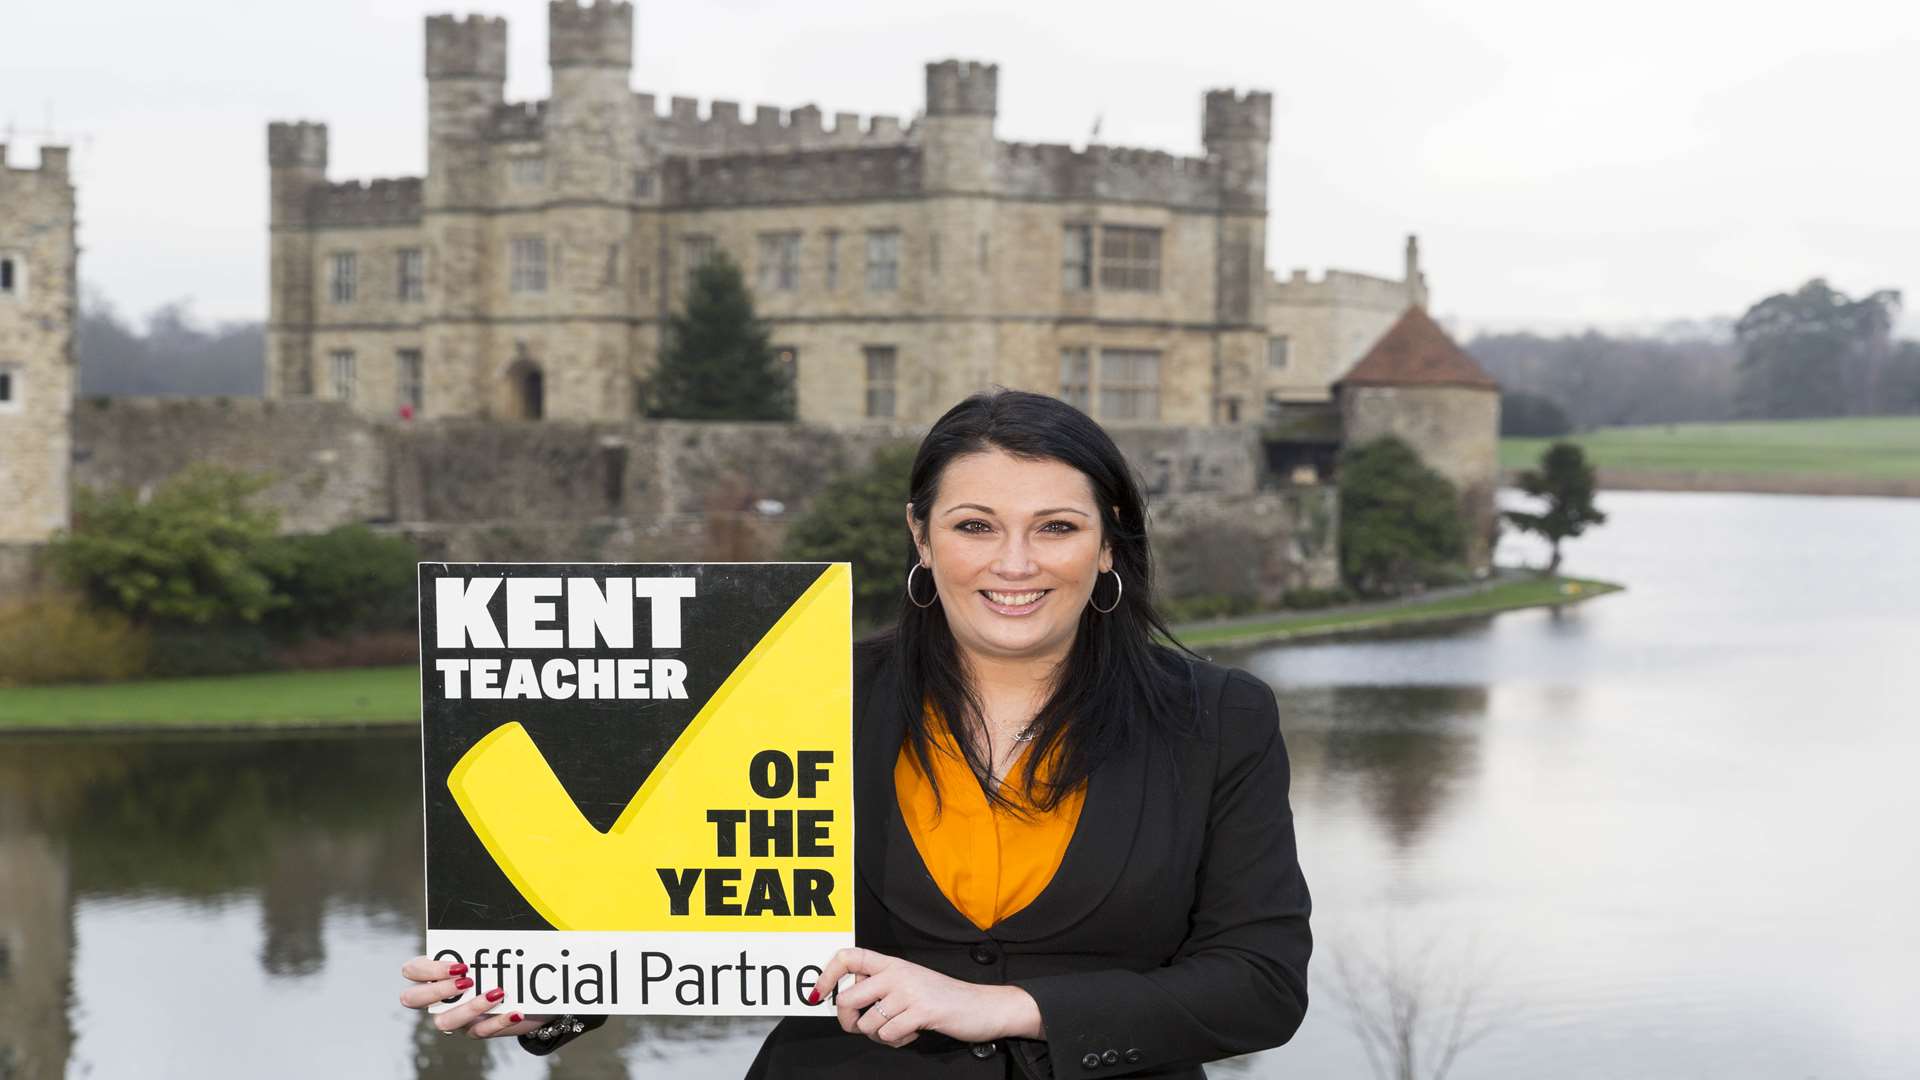 Leah Macdonald of Three R's Teacher Recruitment which is supporting the Kent Teacher of the Year Awards 2016.